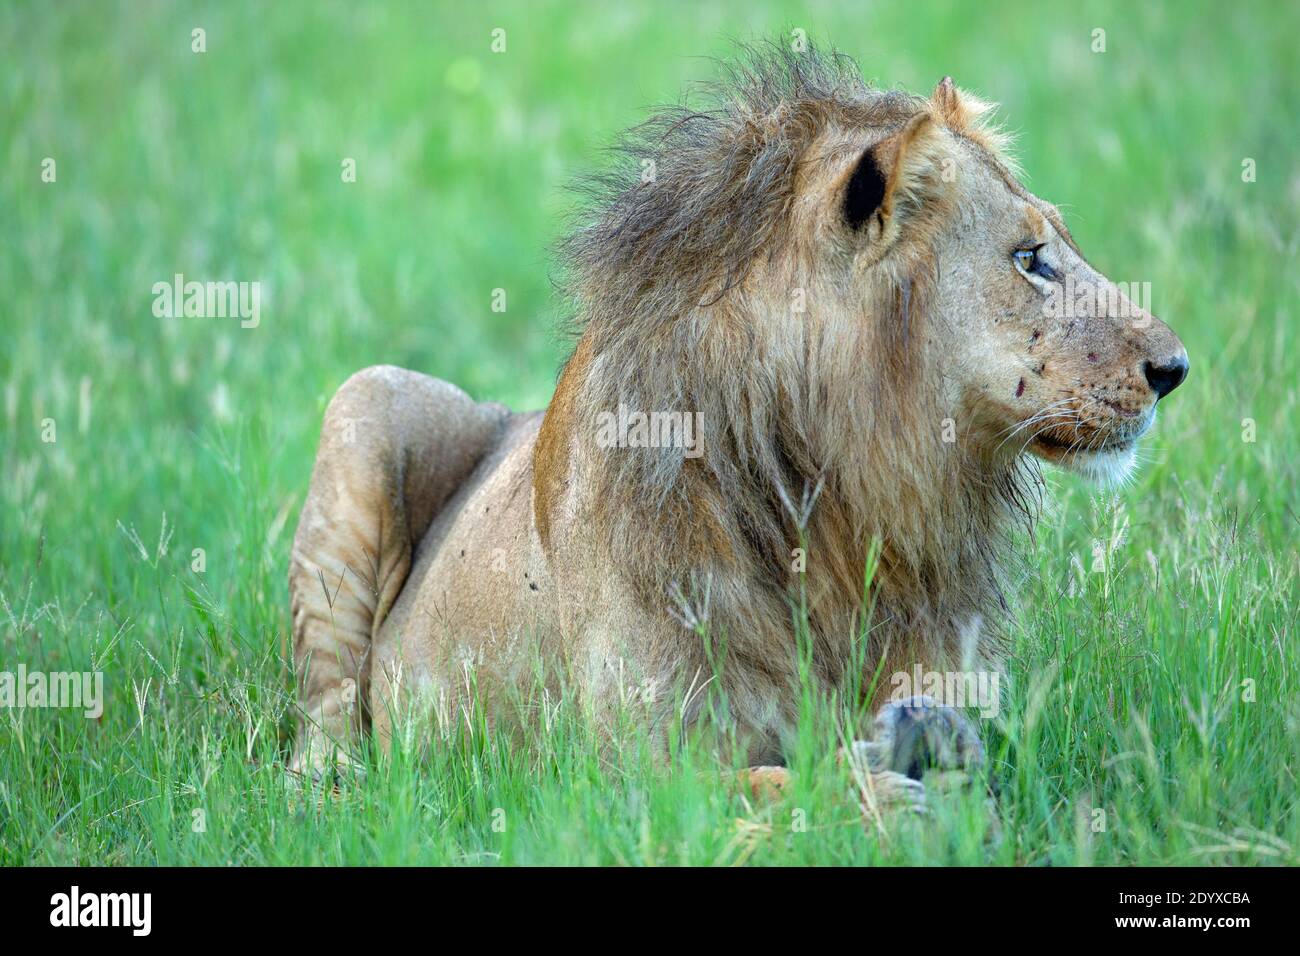 African Lion (Panthera leo). Old, elderly, male, in apparently poor physical condition. shaggy, thin haird mane, scarred face are indications. Continu Stock Photo